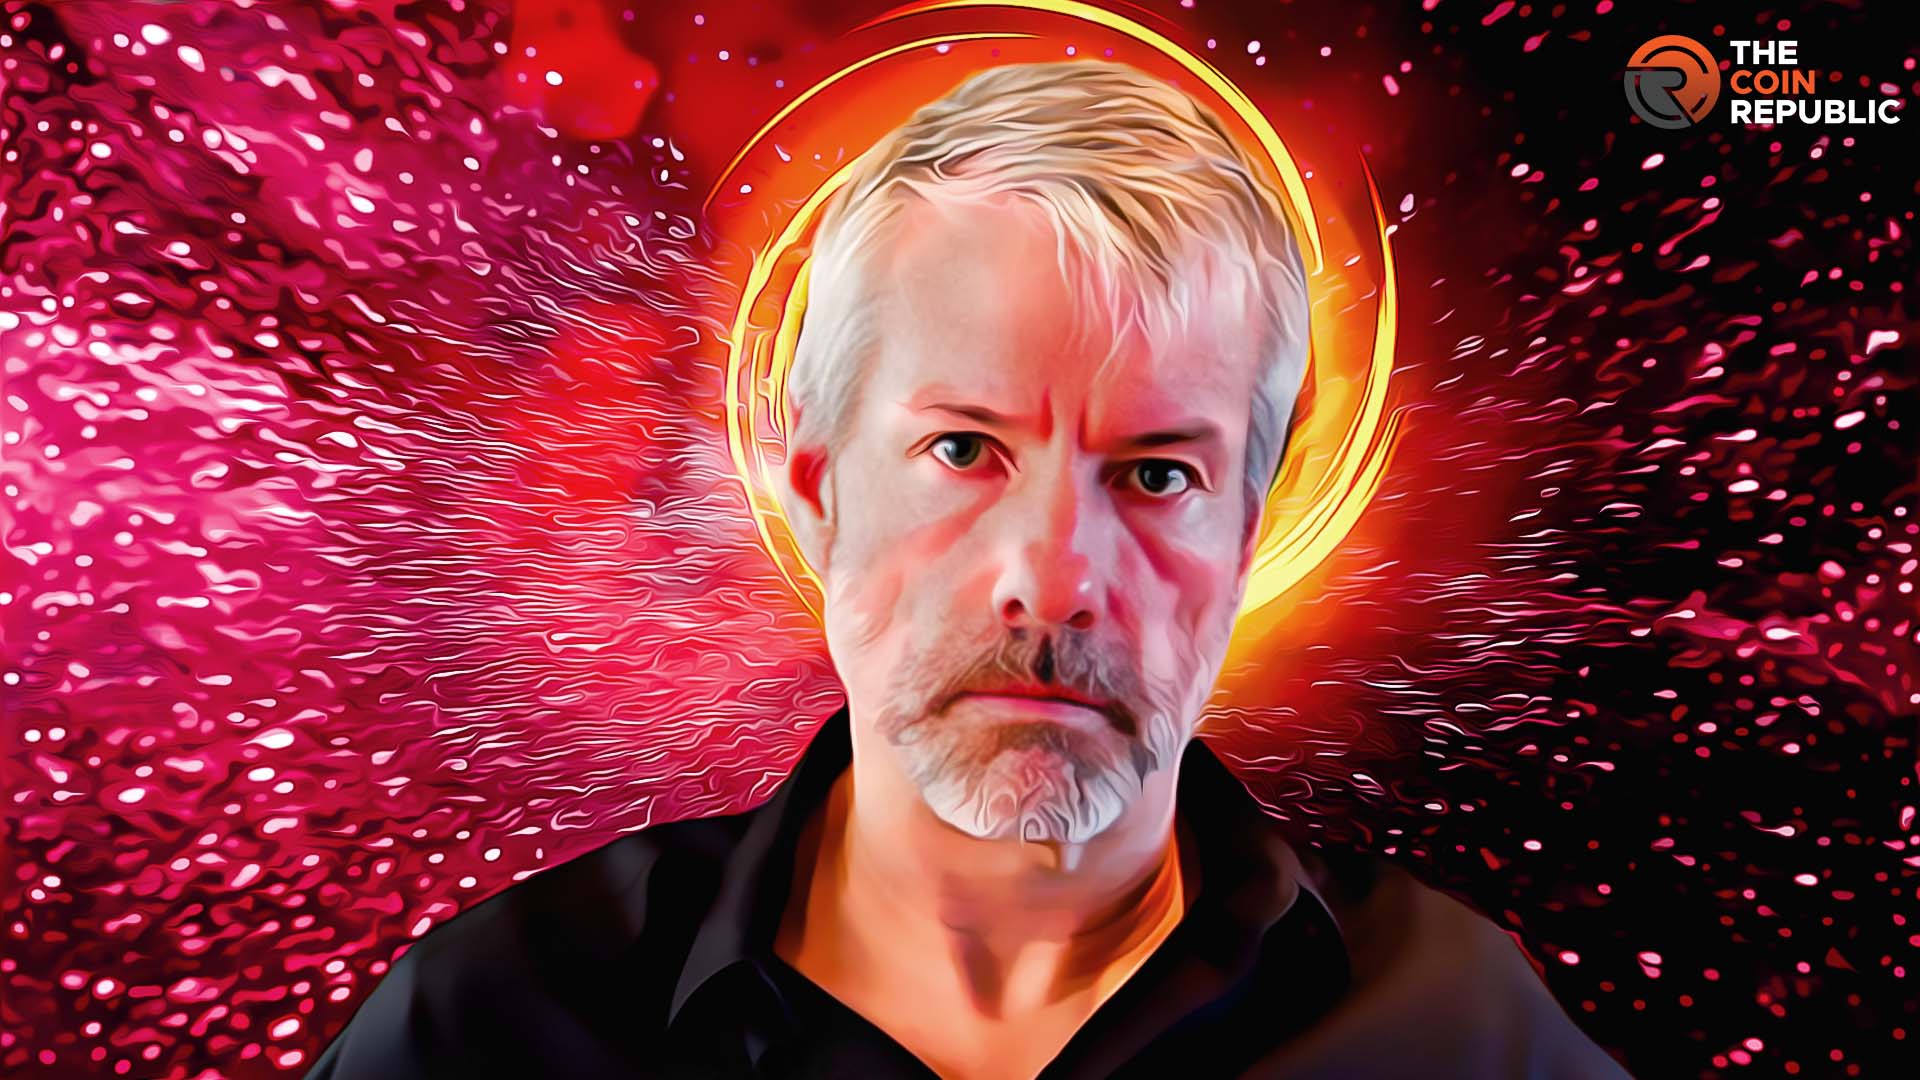 Michael Saylor: BTC Makes You Rethink Your Entire Existence